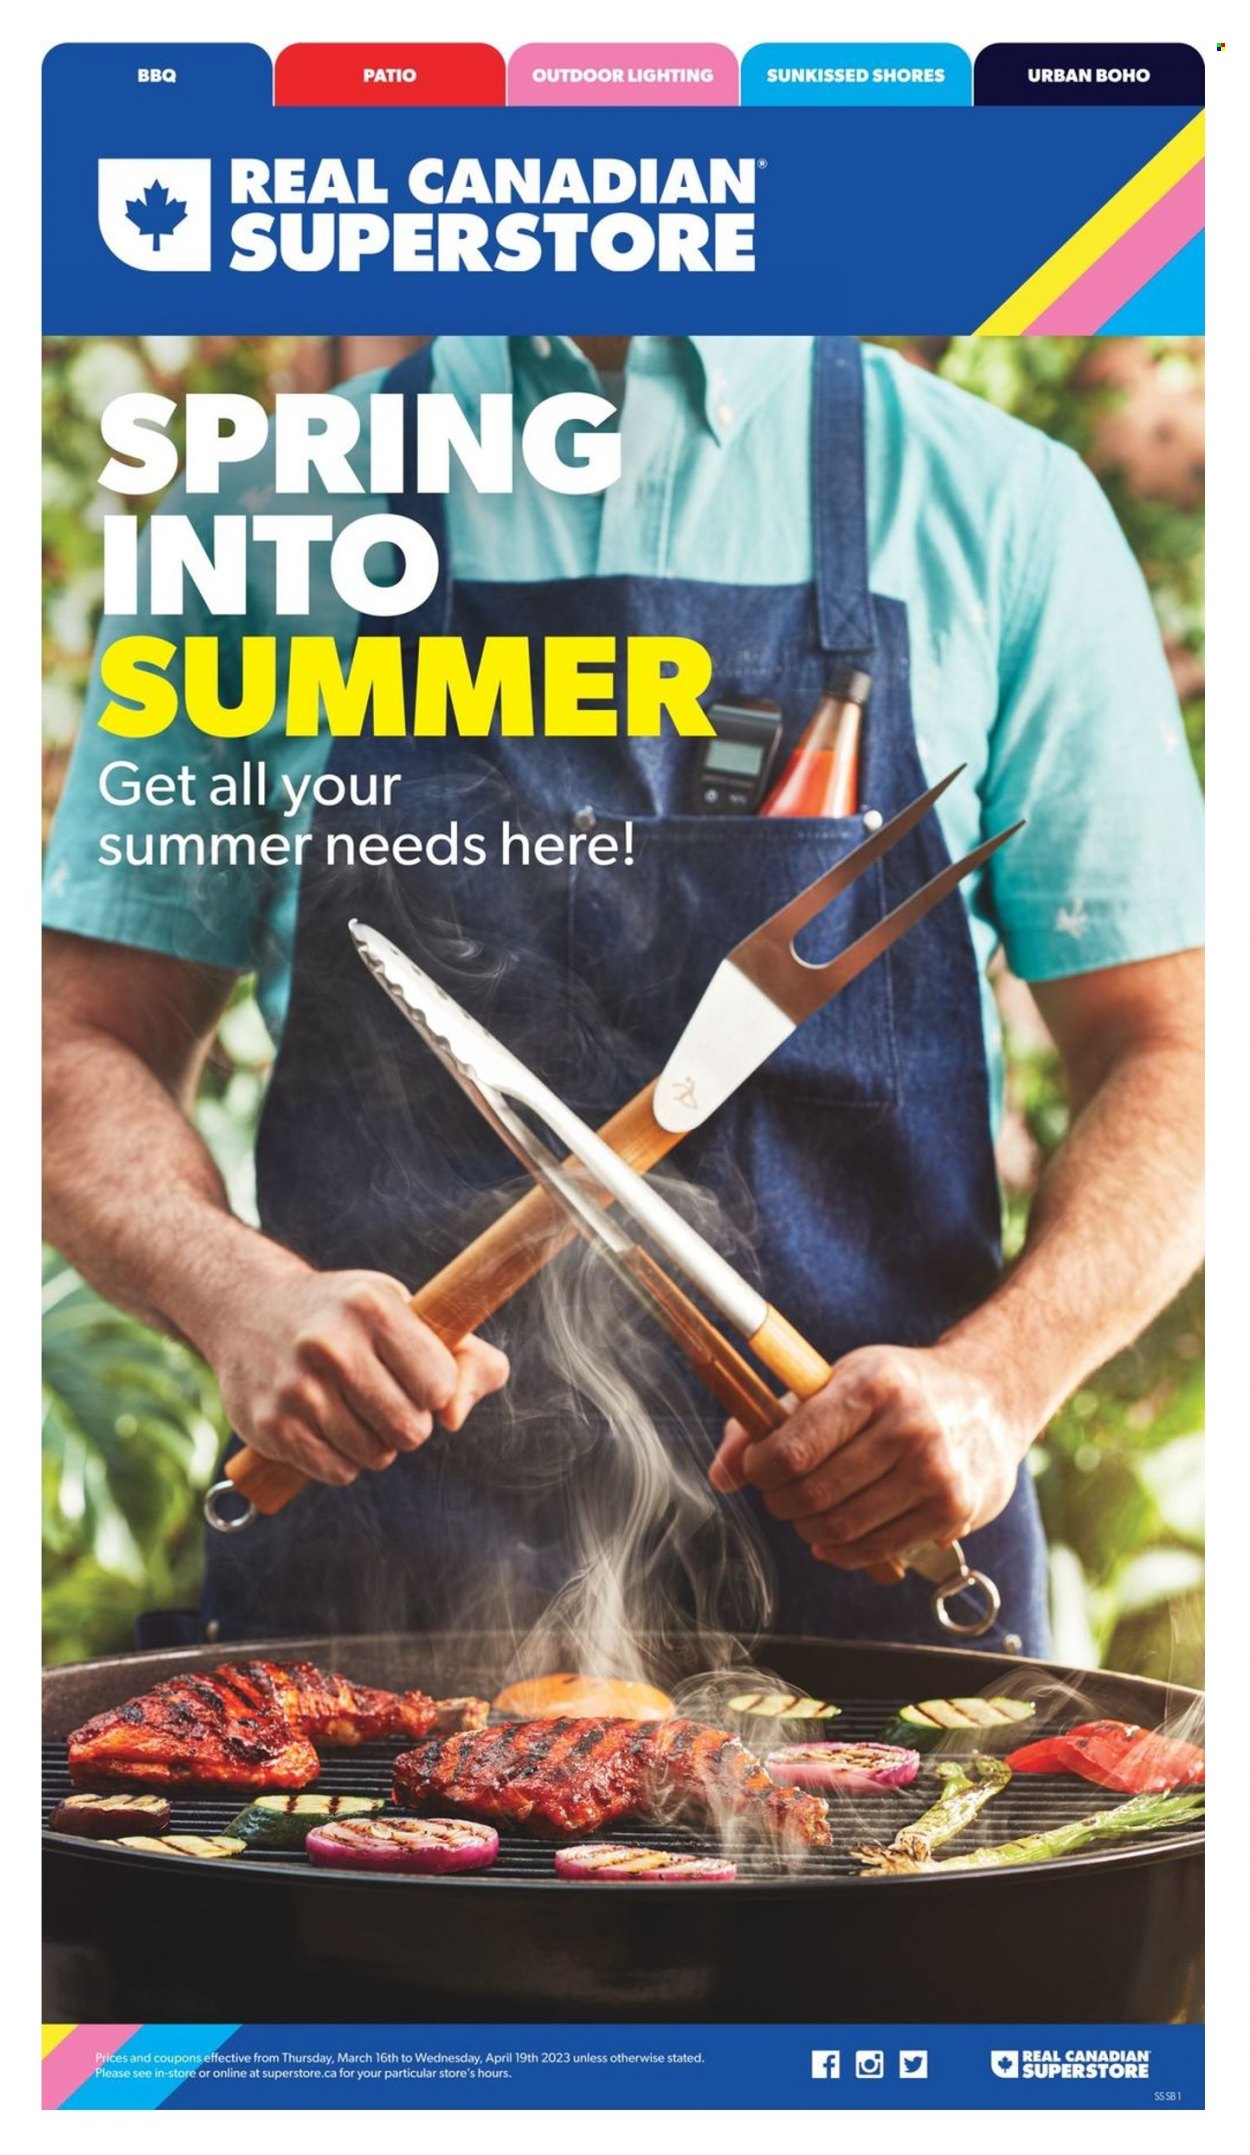 Real Canadian Superstore Flyer - March 16, 2023 - April 19, 2023 - Sales products - bbq, Patio, lighting. Page 1.